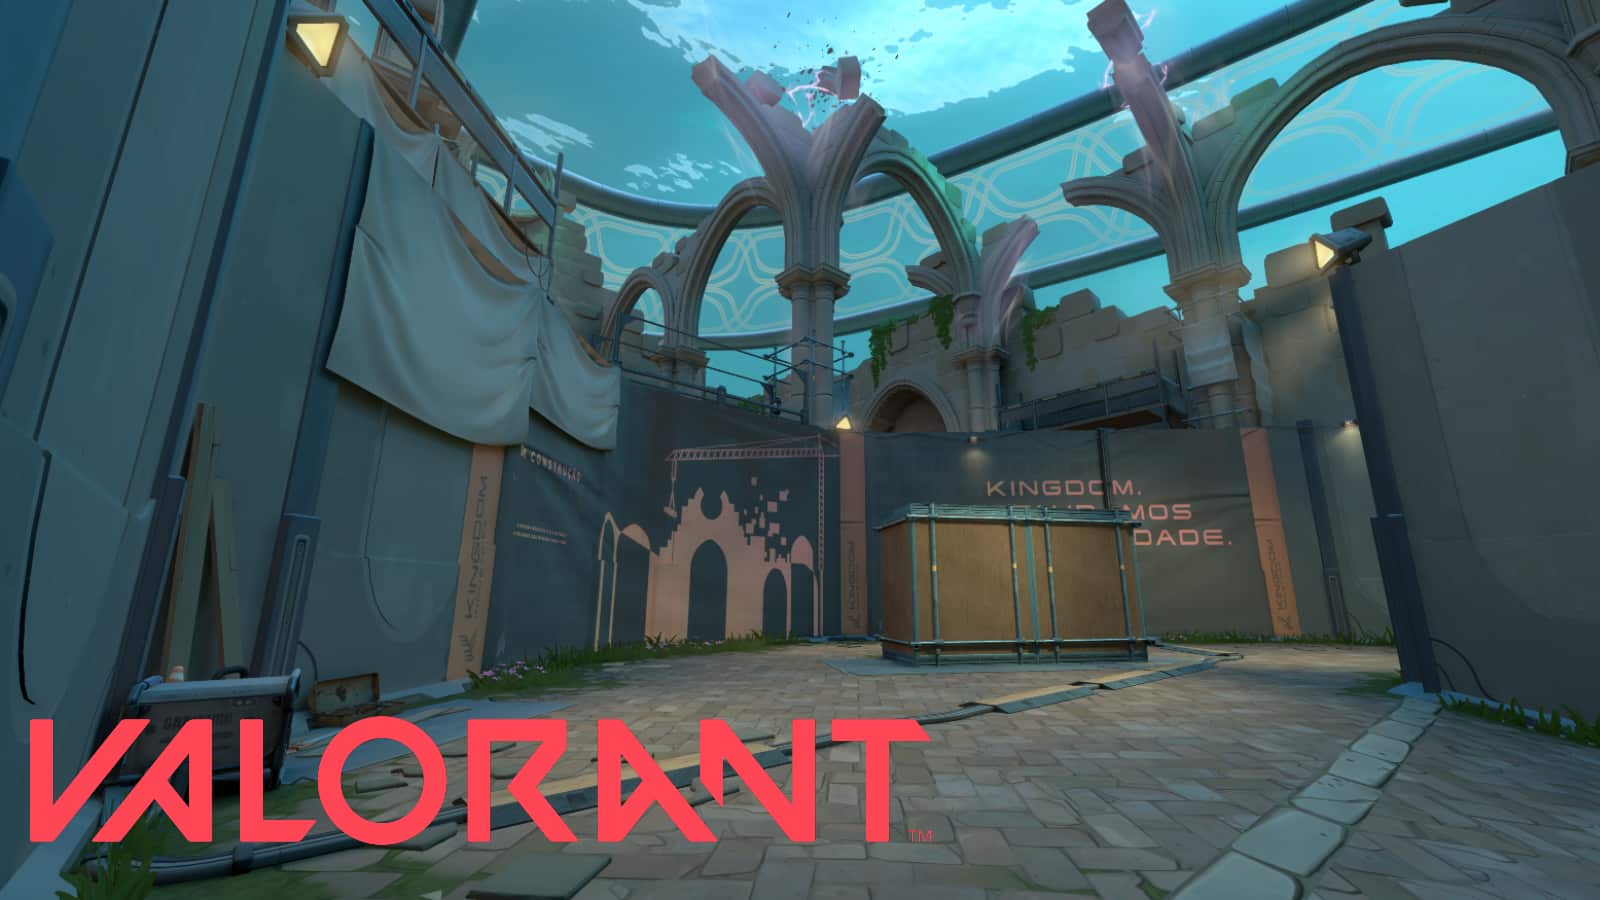 New Valorant map Pearl revealed: Layout, release date - Dexerto